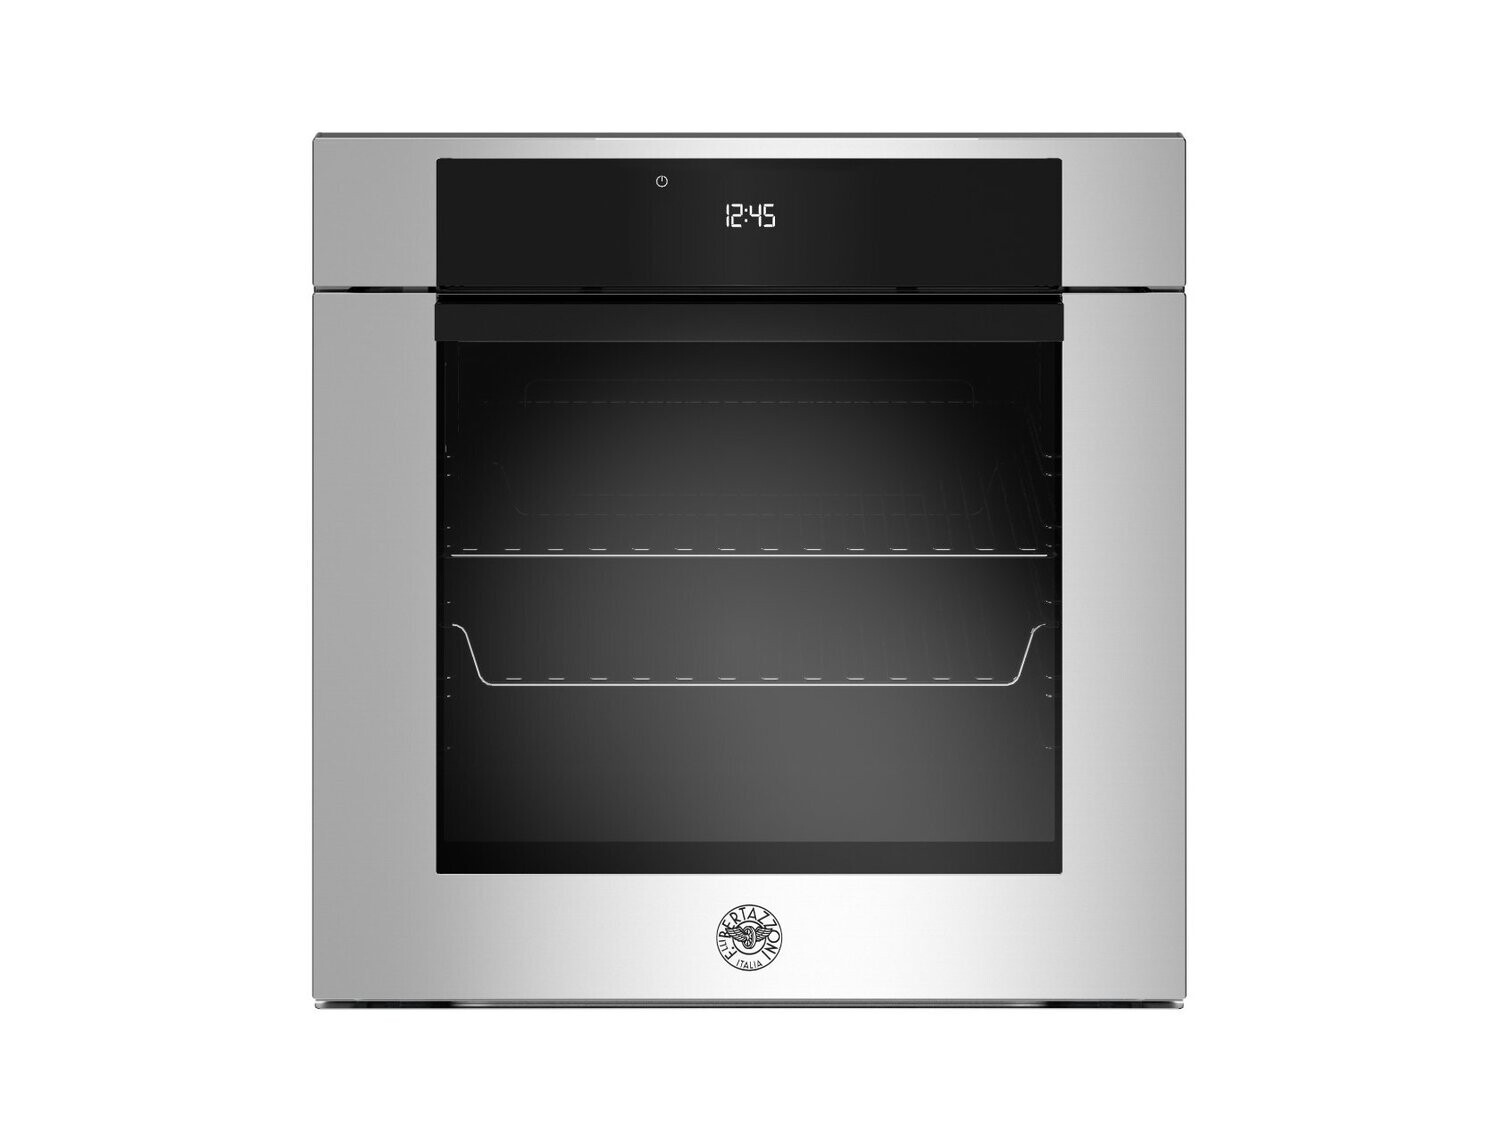 Bertazzoni 60cm Modern Series Built In Electric Pyro with LCD Display Oven, Colours: Stainless Steel